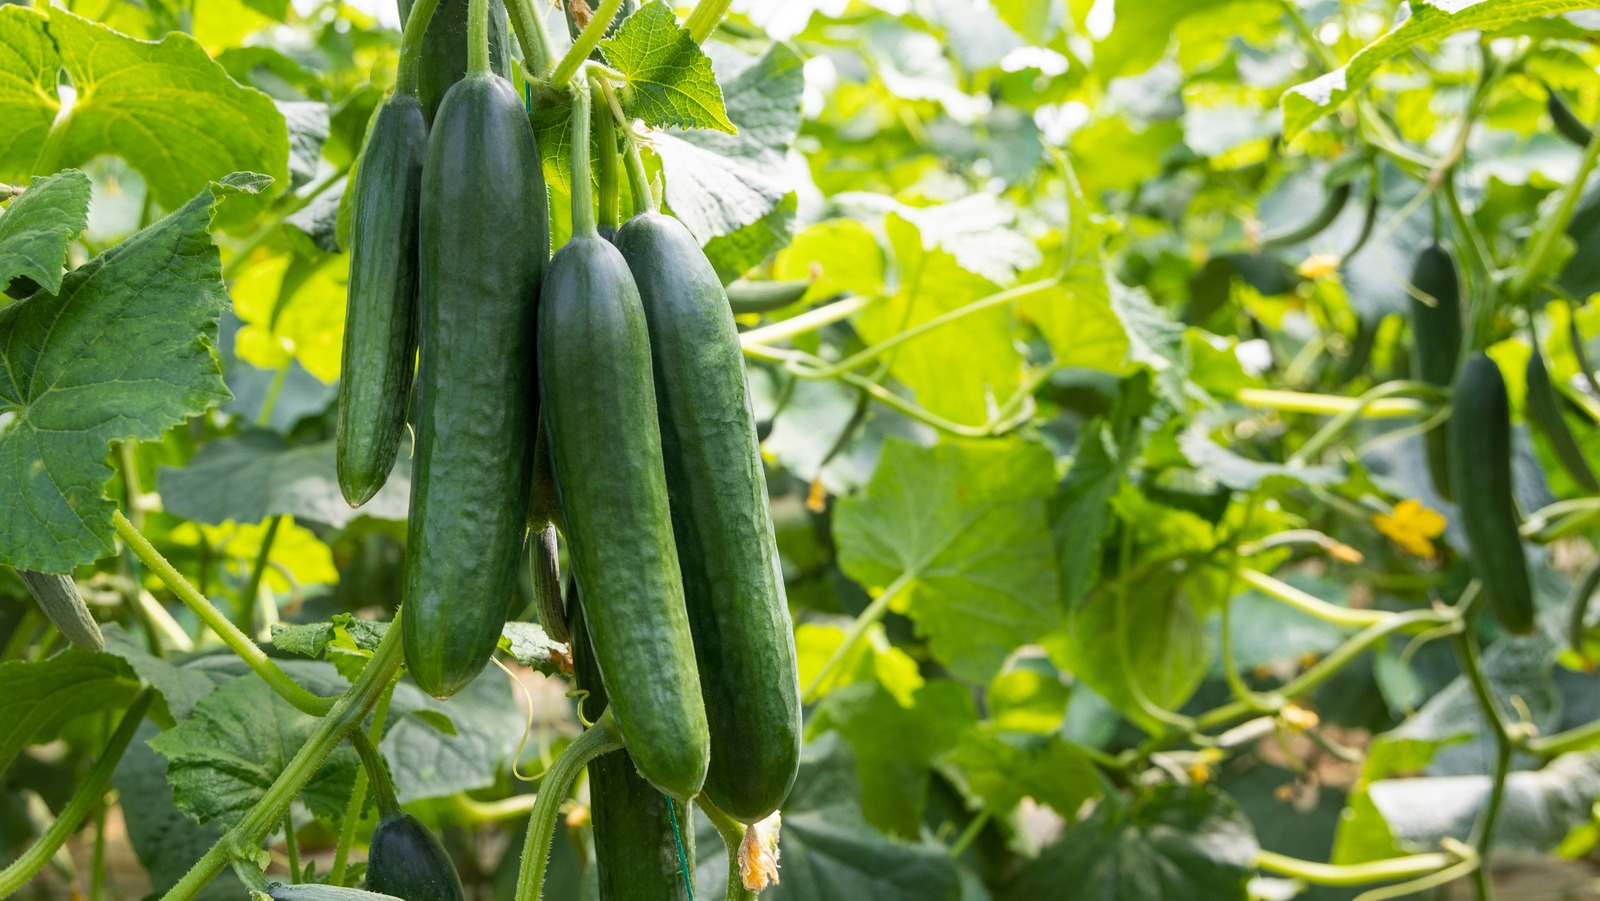 How to Trellis Cucumbers - The Home Depot